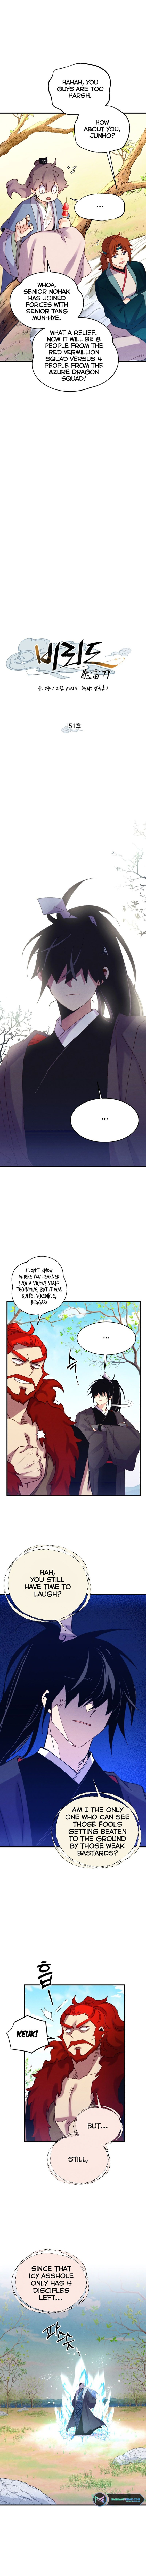 Lightning Degree Chapter 151 page 4 - MangaWeebs.in